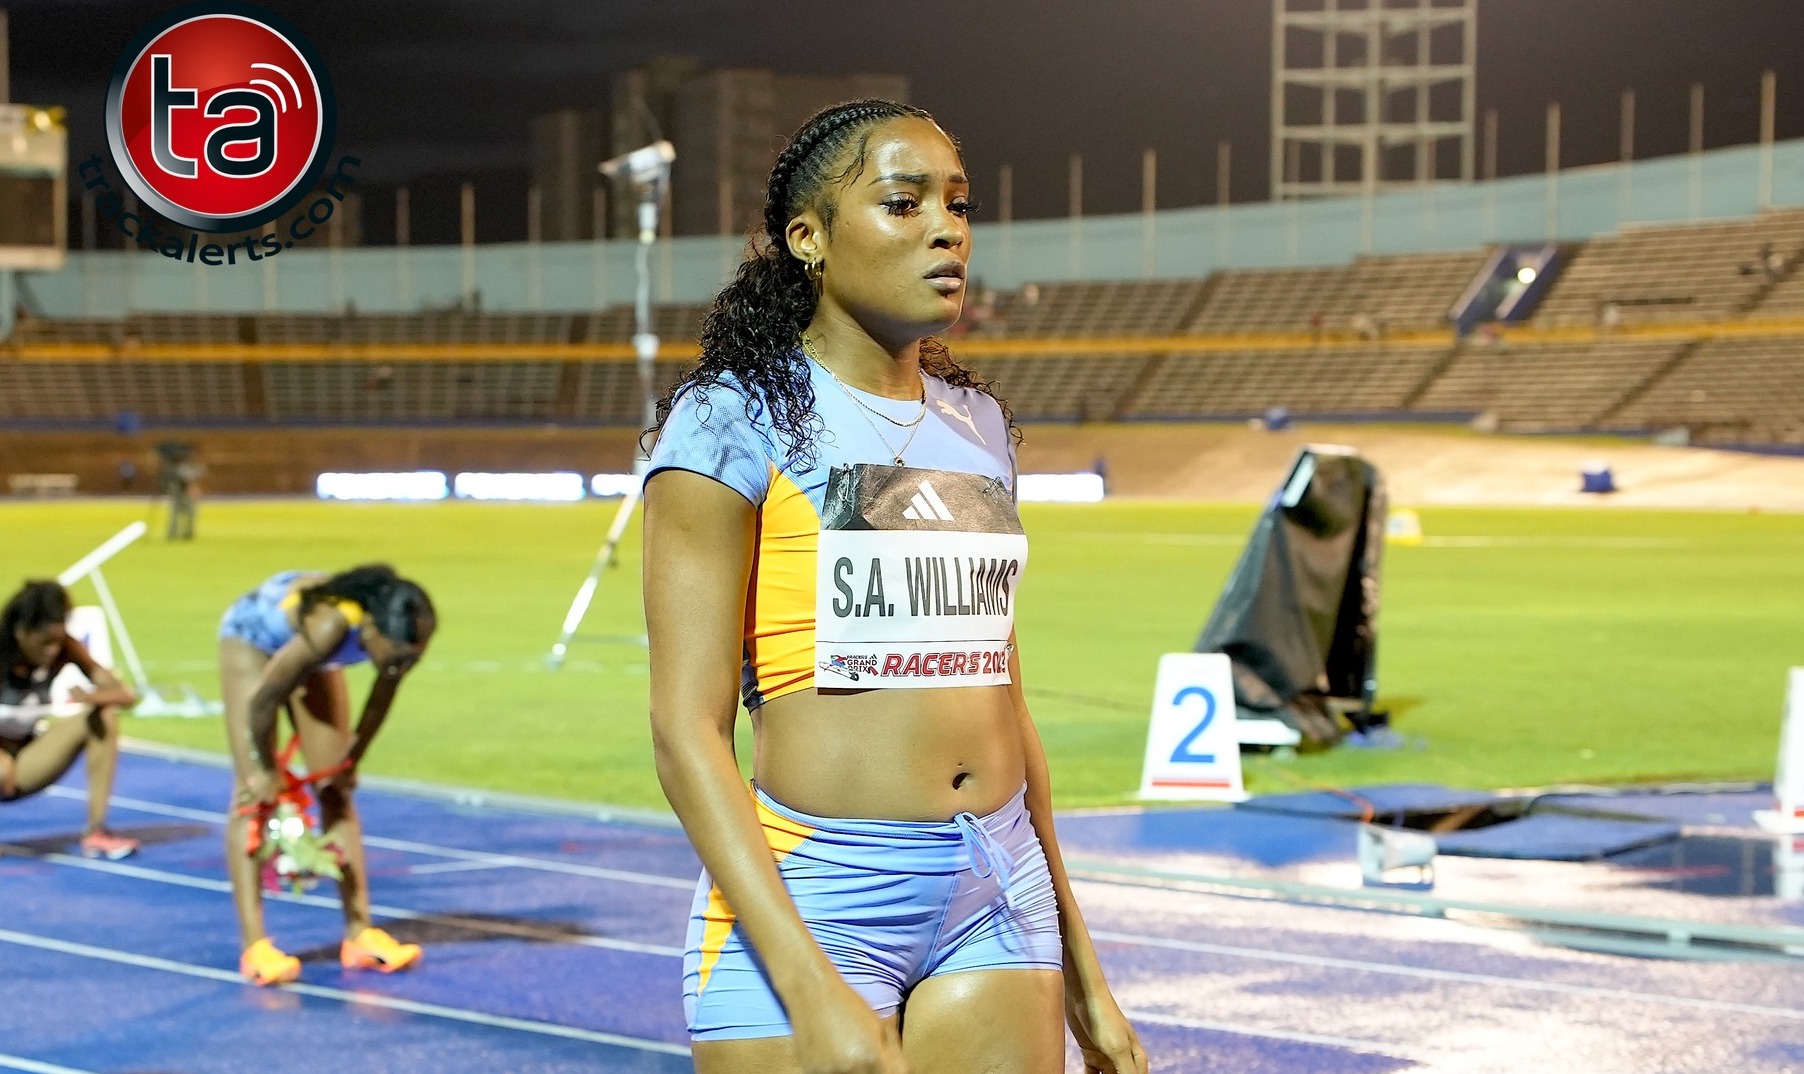 Stacey-Ann Williams is a Jamaican athlete specializing in the 400m event